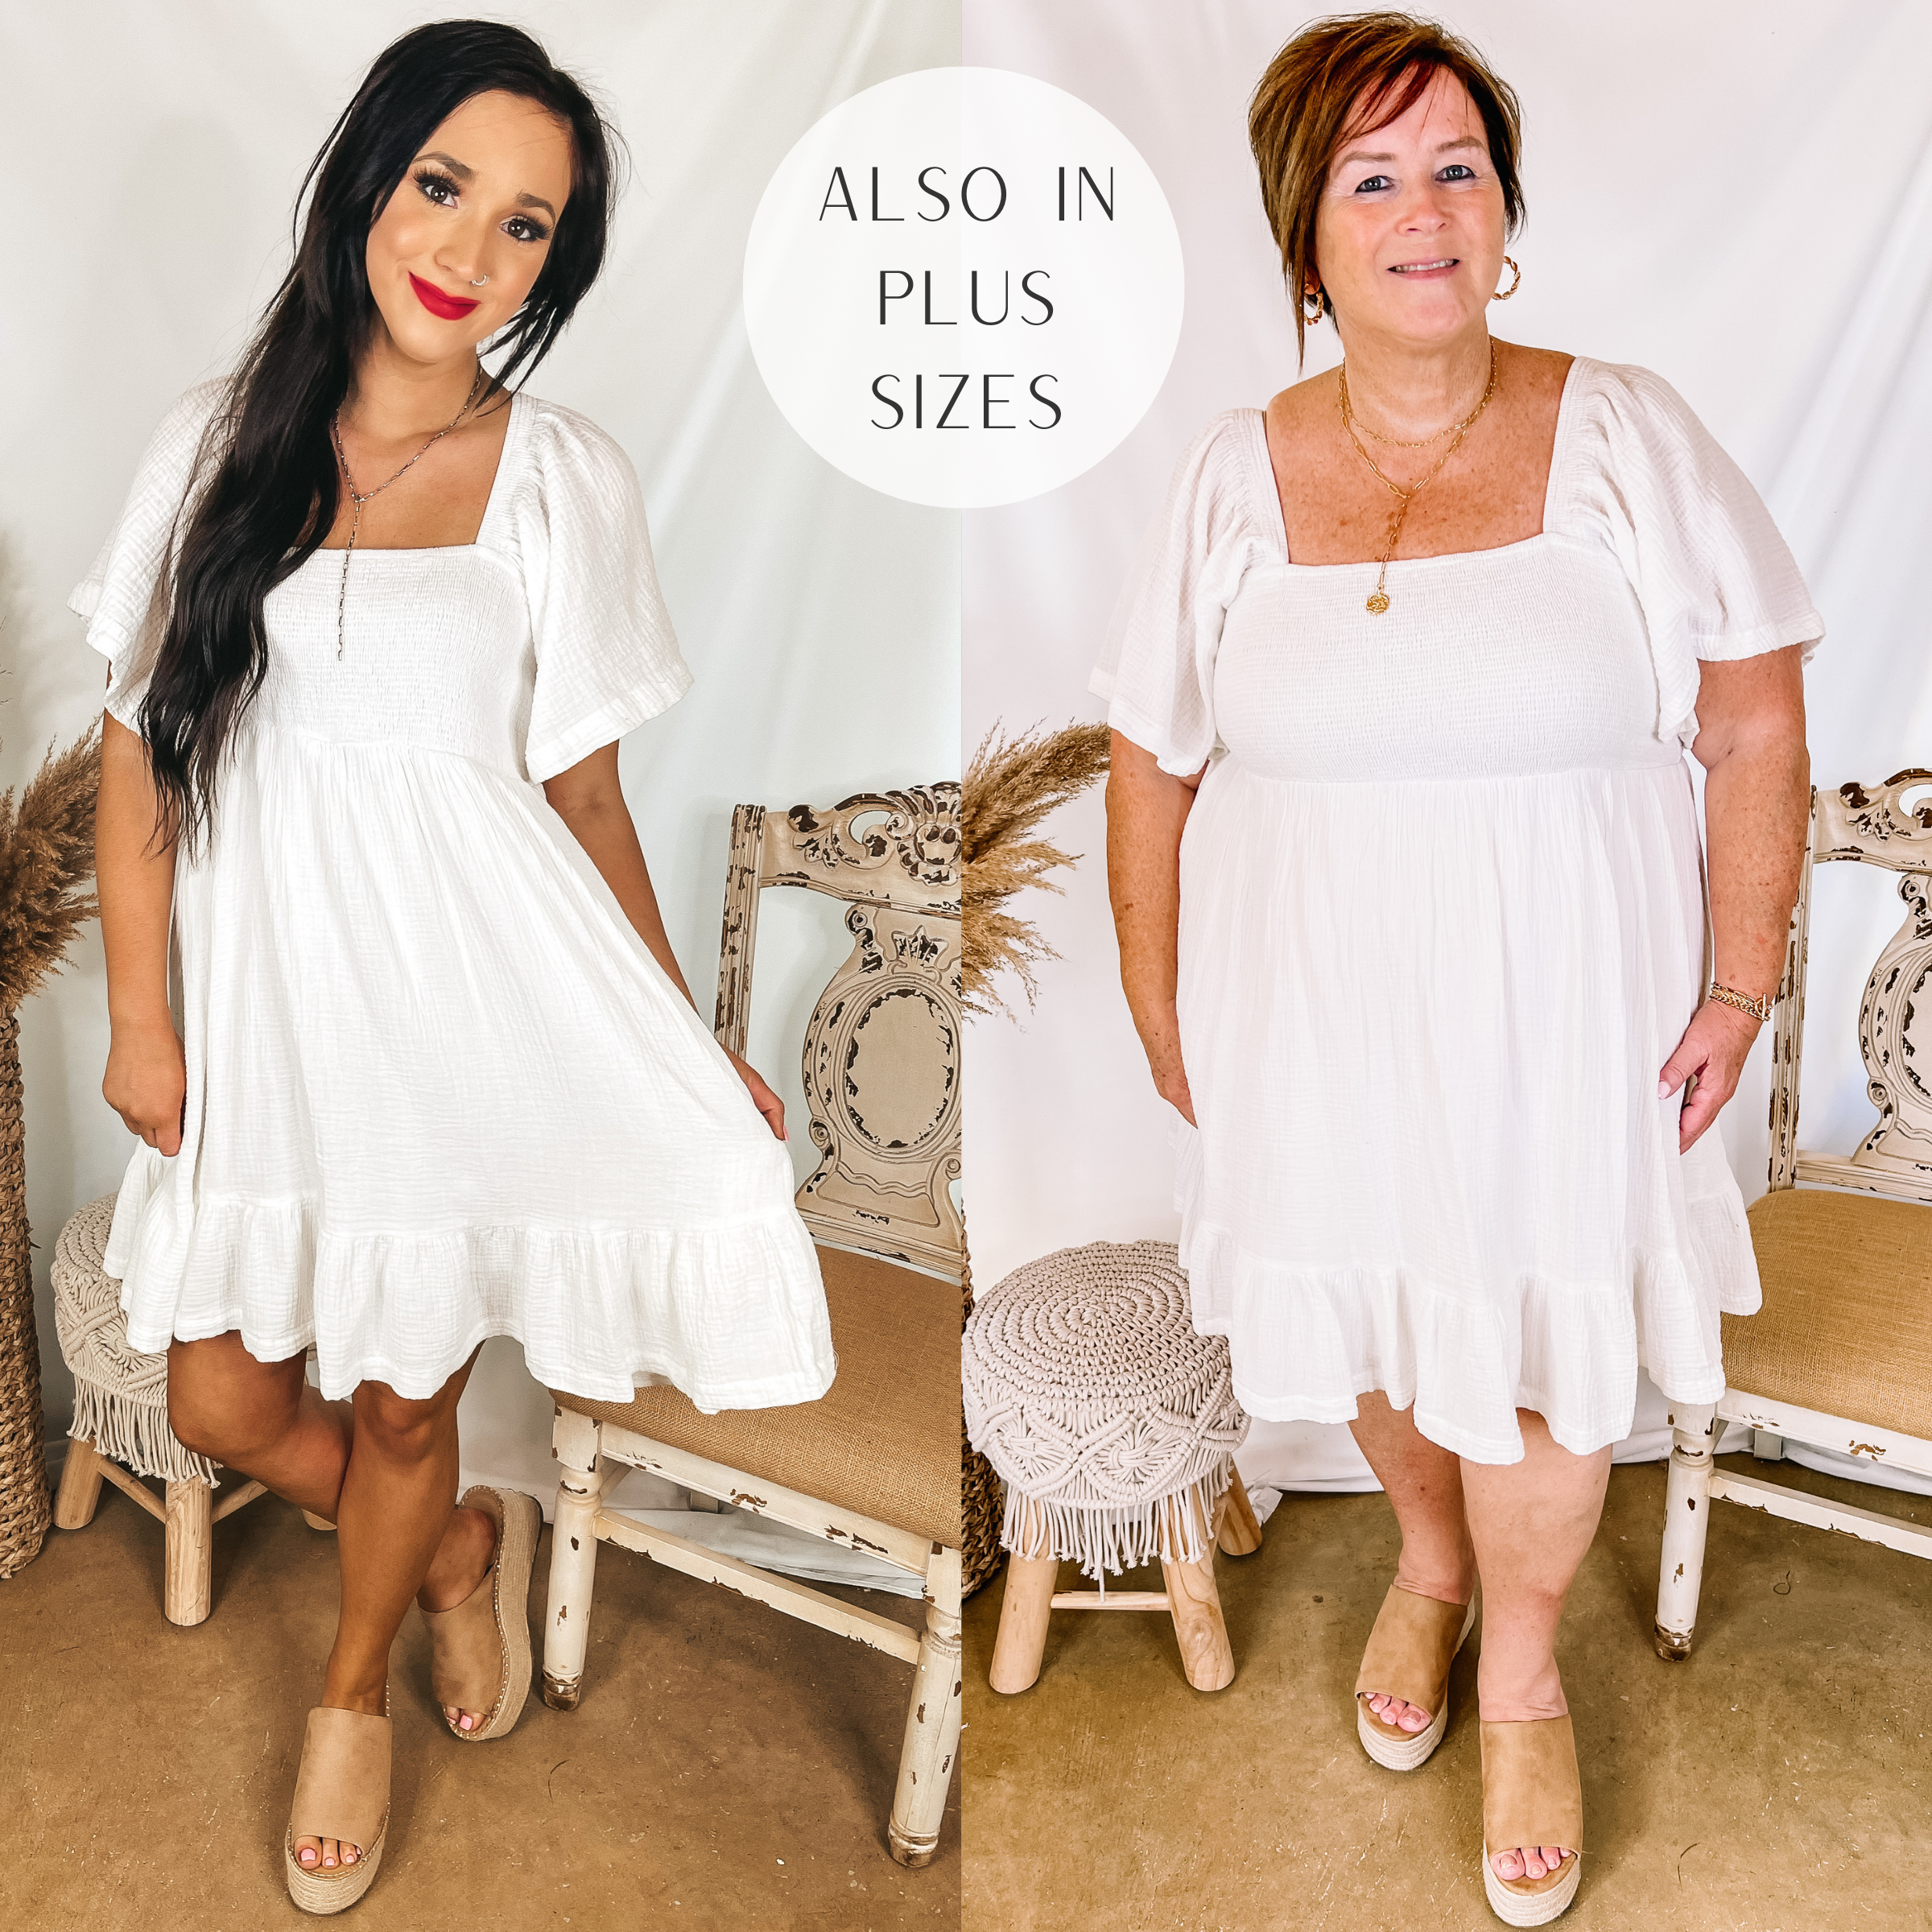 Models are wearing a white short dress that has a ruffle hemline. Size small model has it paired with tan wedges and silver jewelry. Plus size model has it paired with tan wedges and gold jewelry.